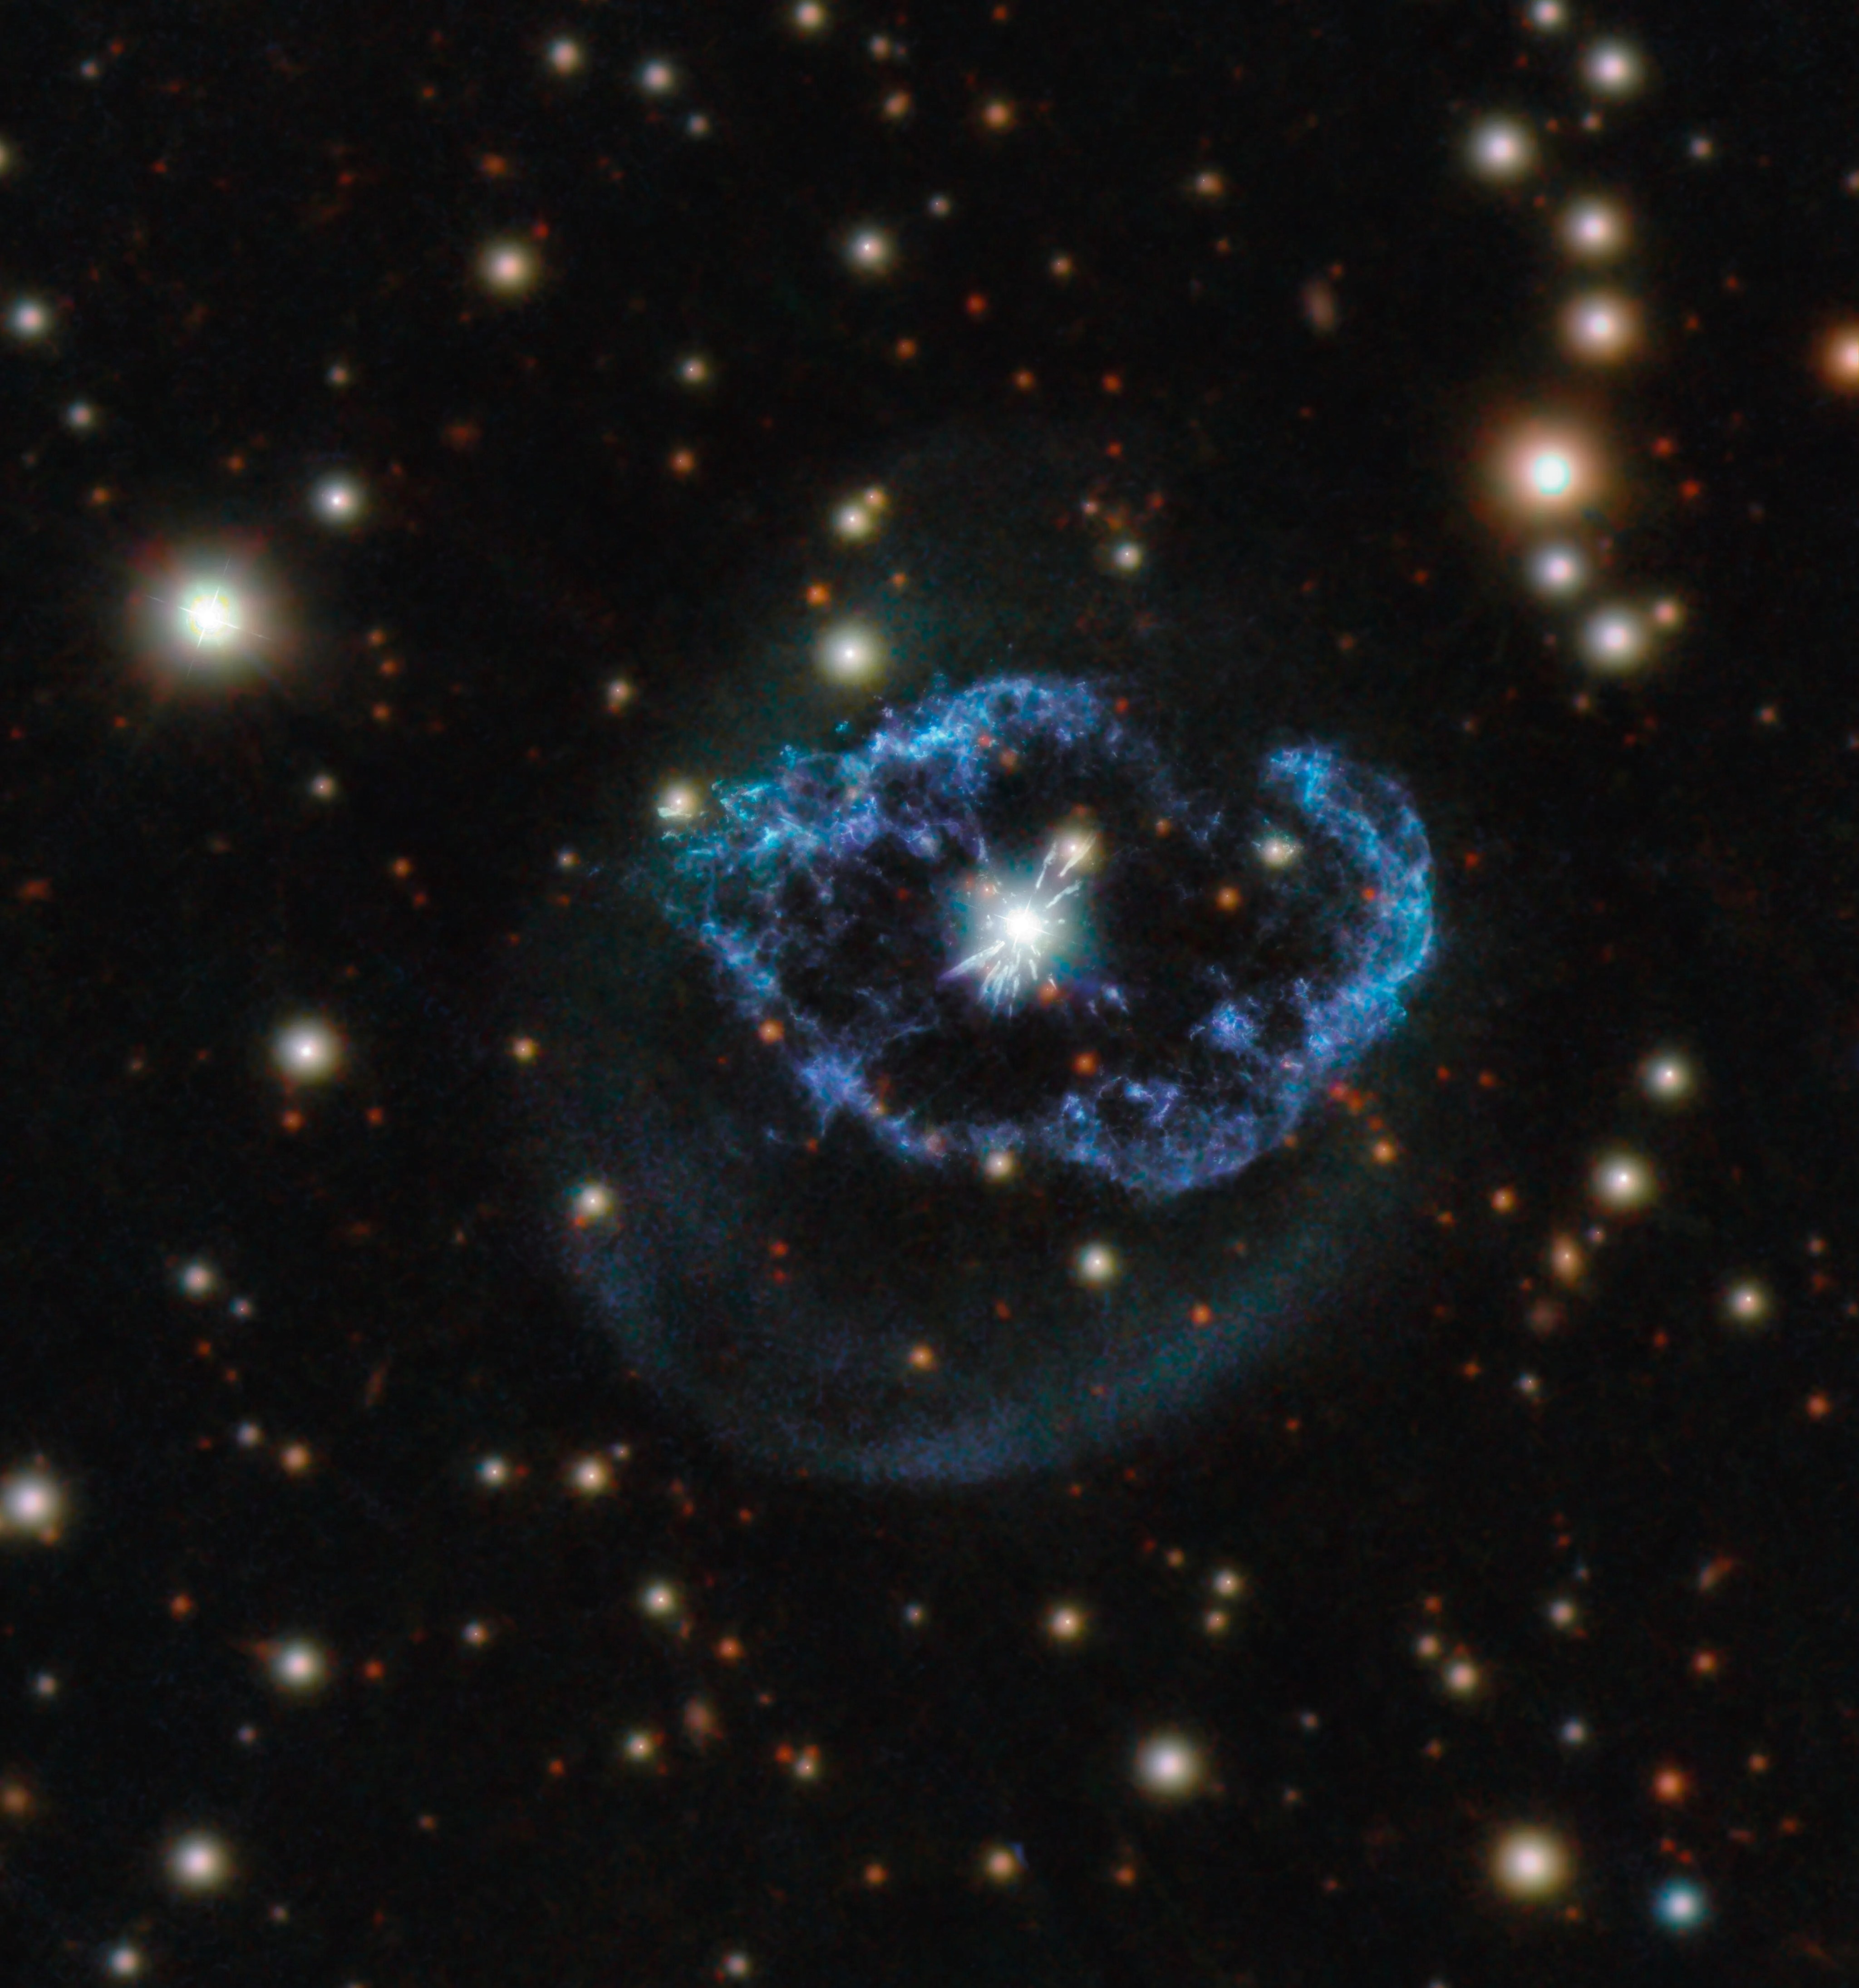 Located around 5,000 light-years away in the constellation of cygnus (the swan), abell 78 is an unusual type of planetary nebula